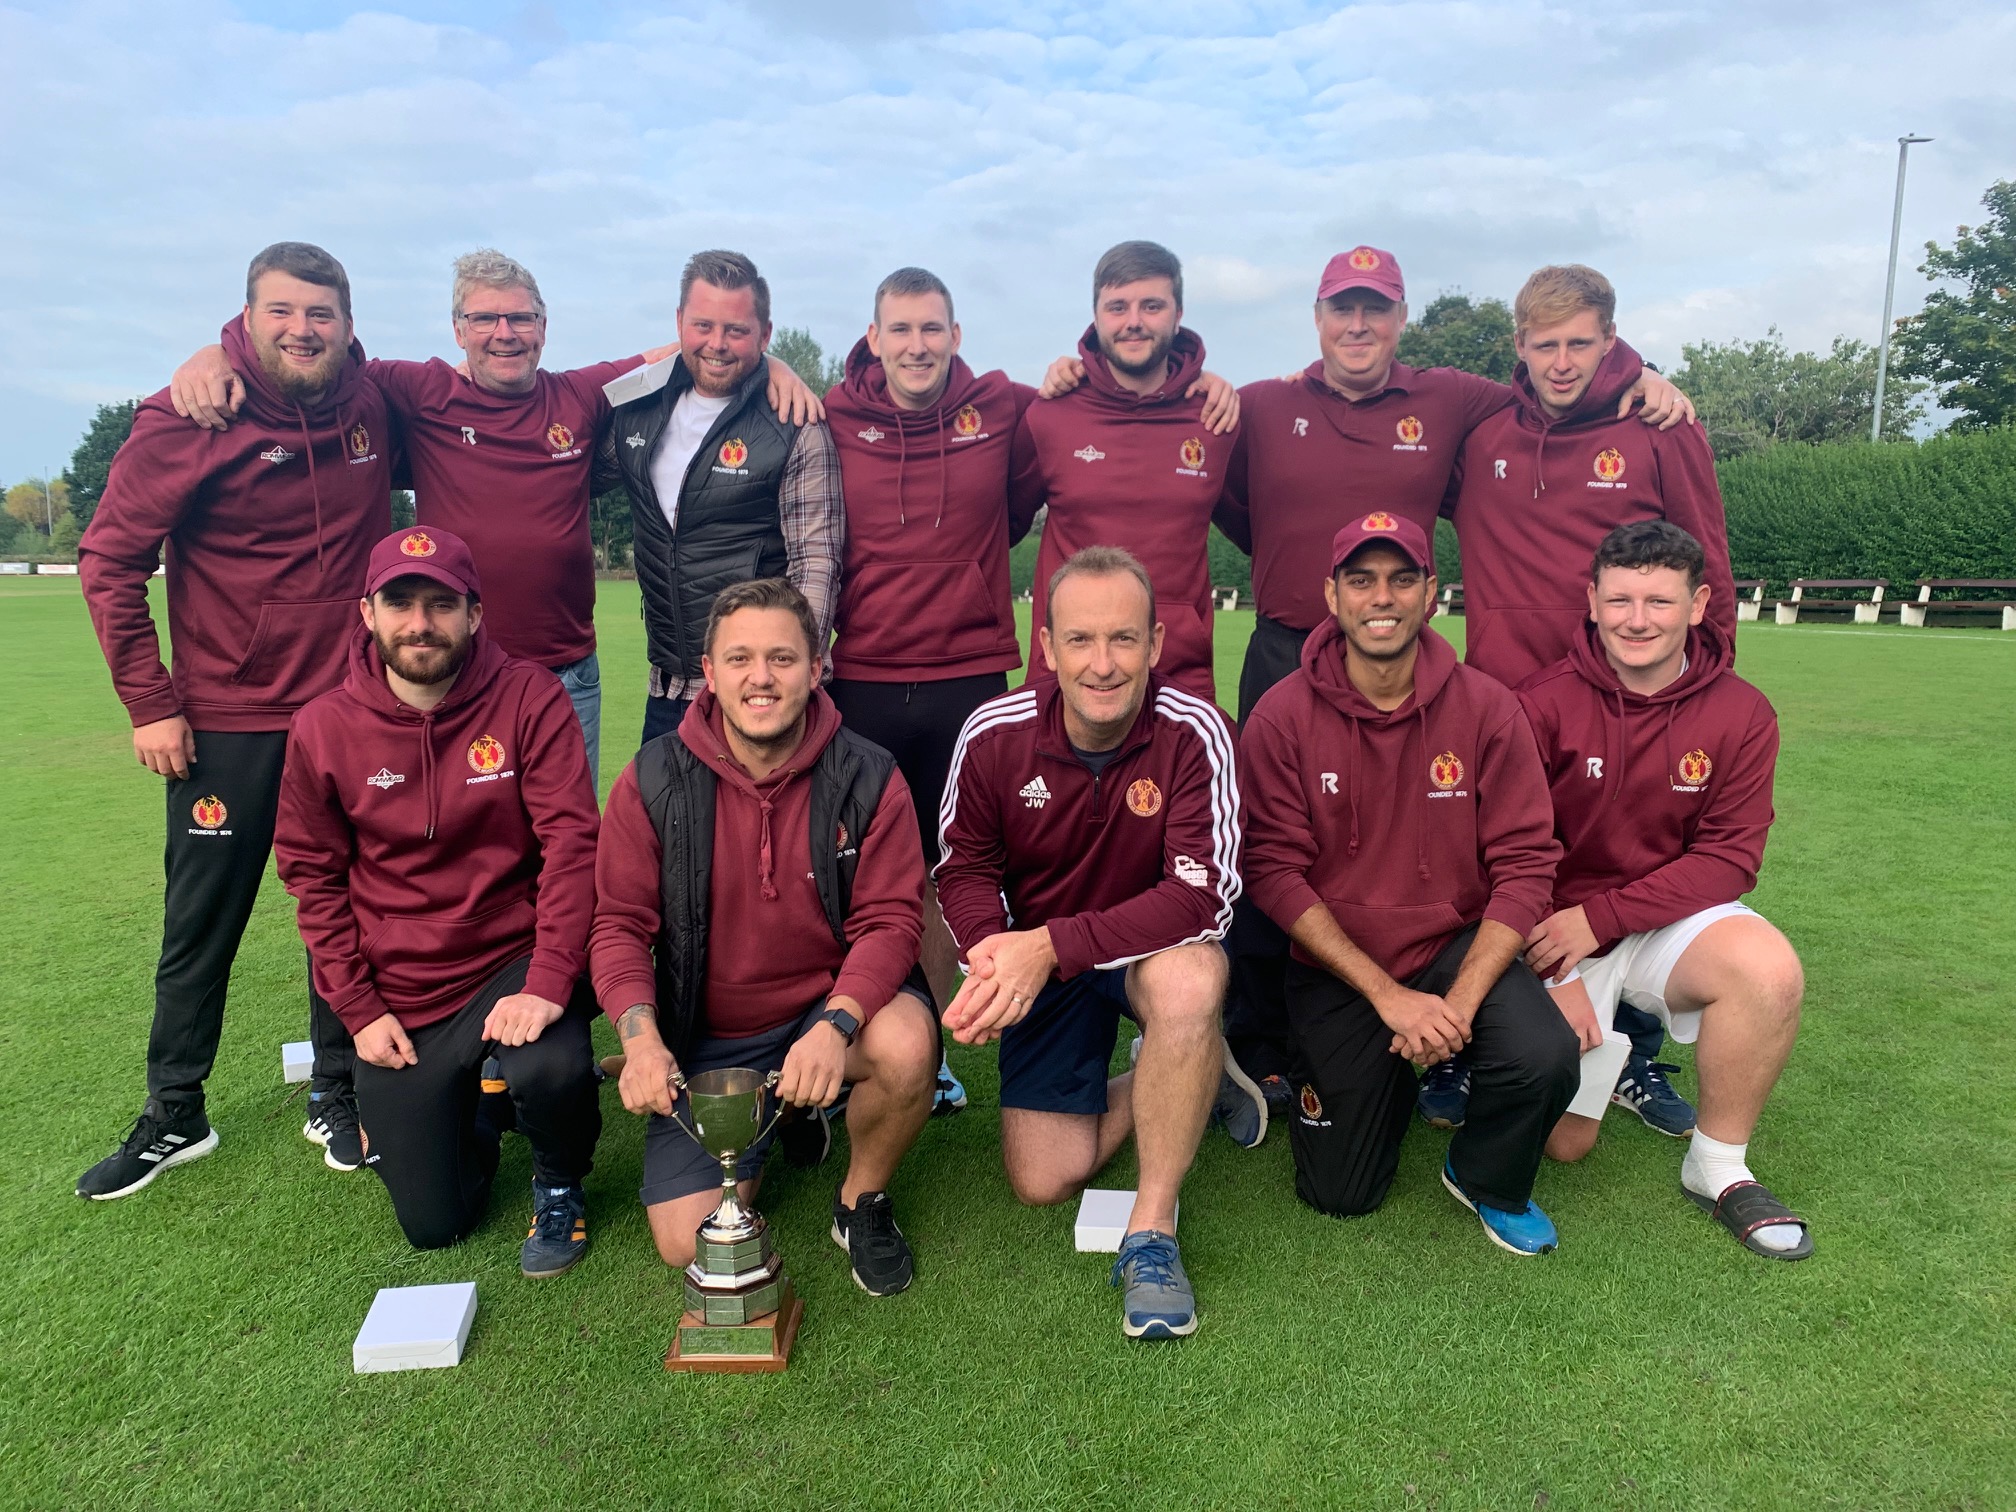 Second Teams Division Two champions